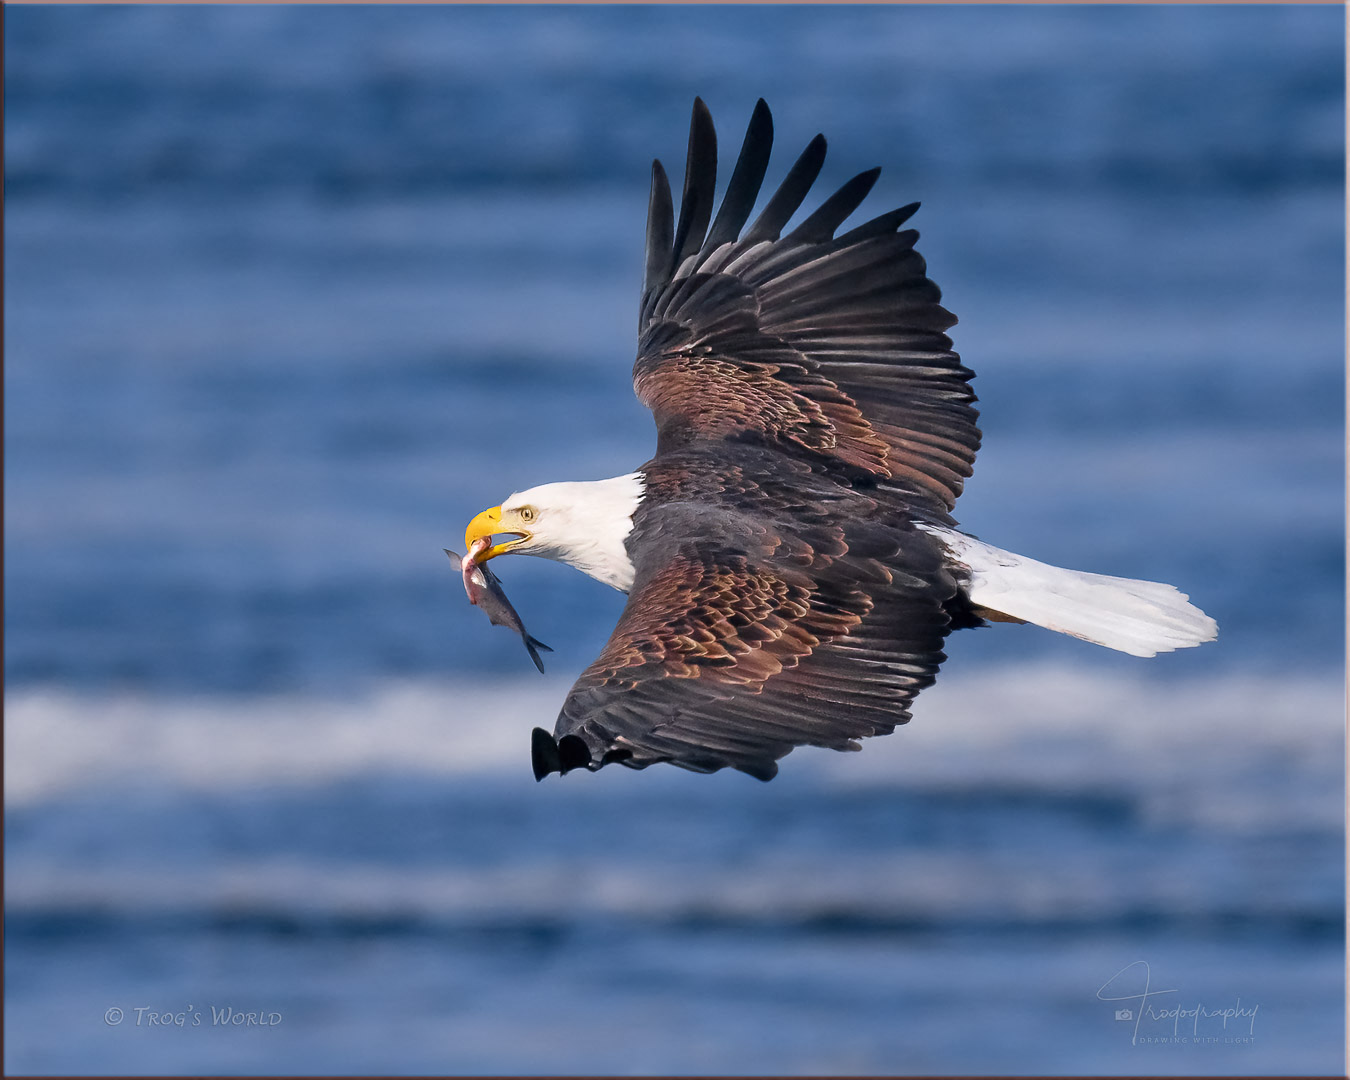 Bald Eagle with a fish in its mouth